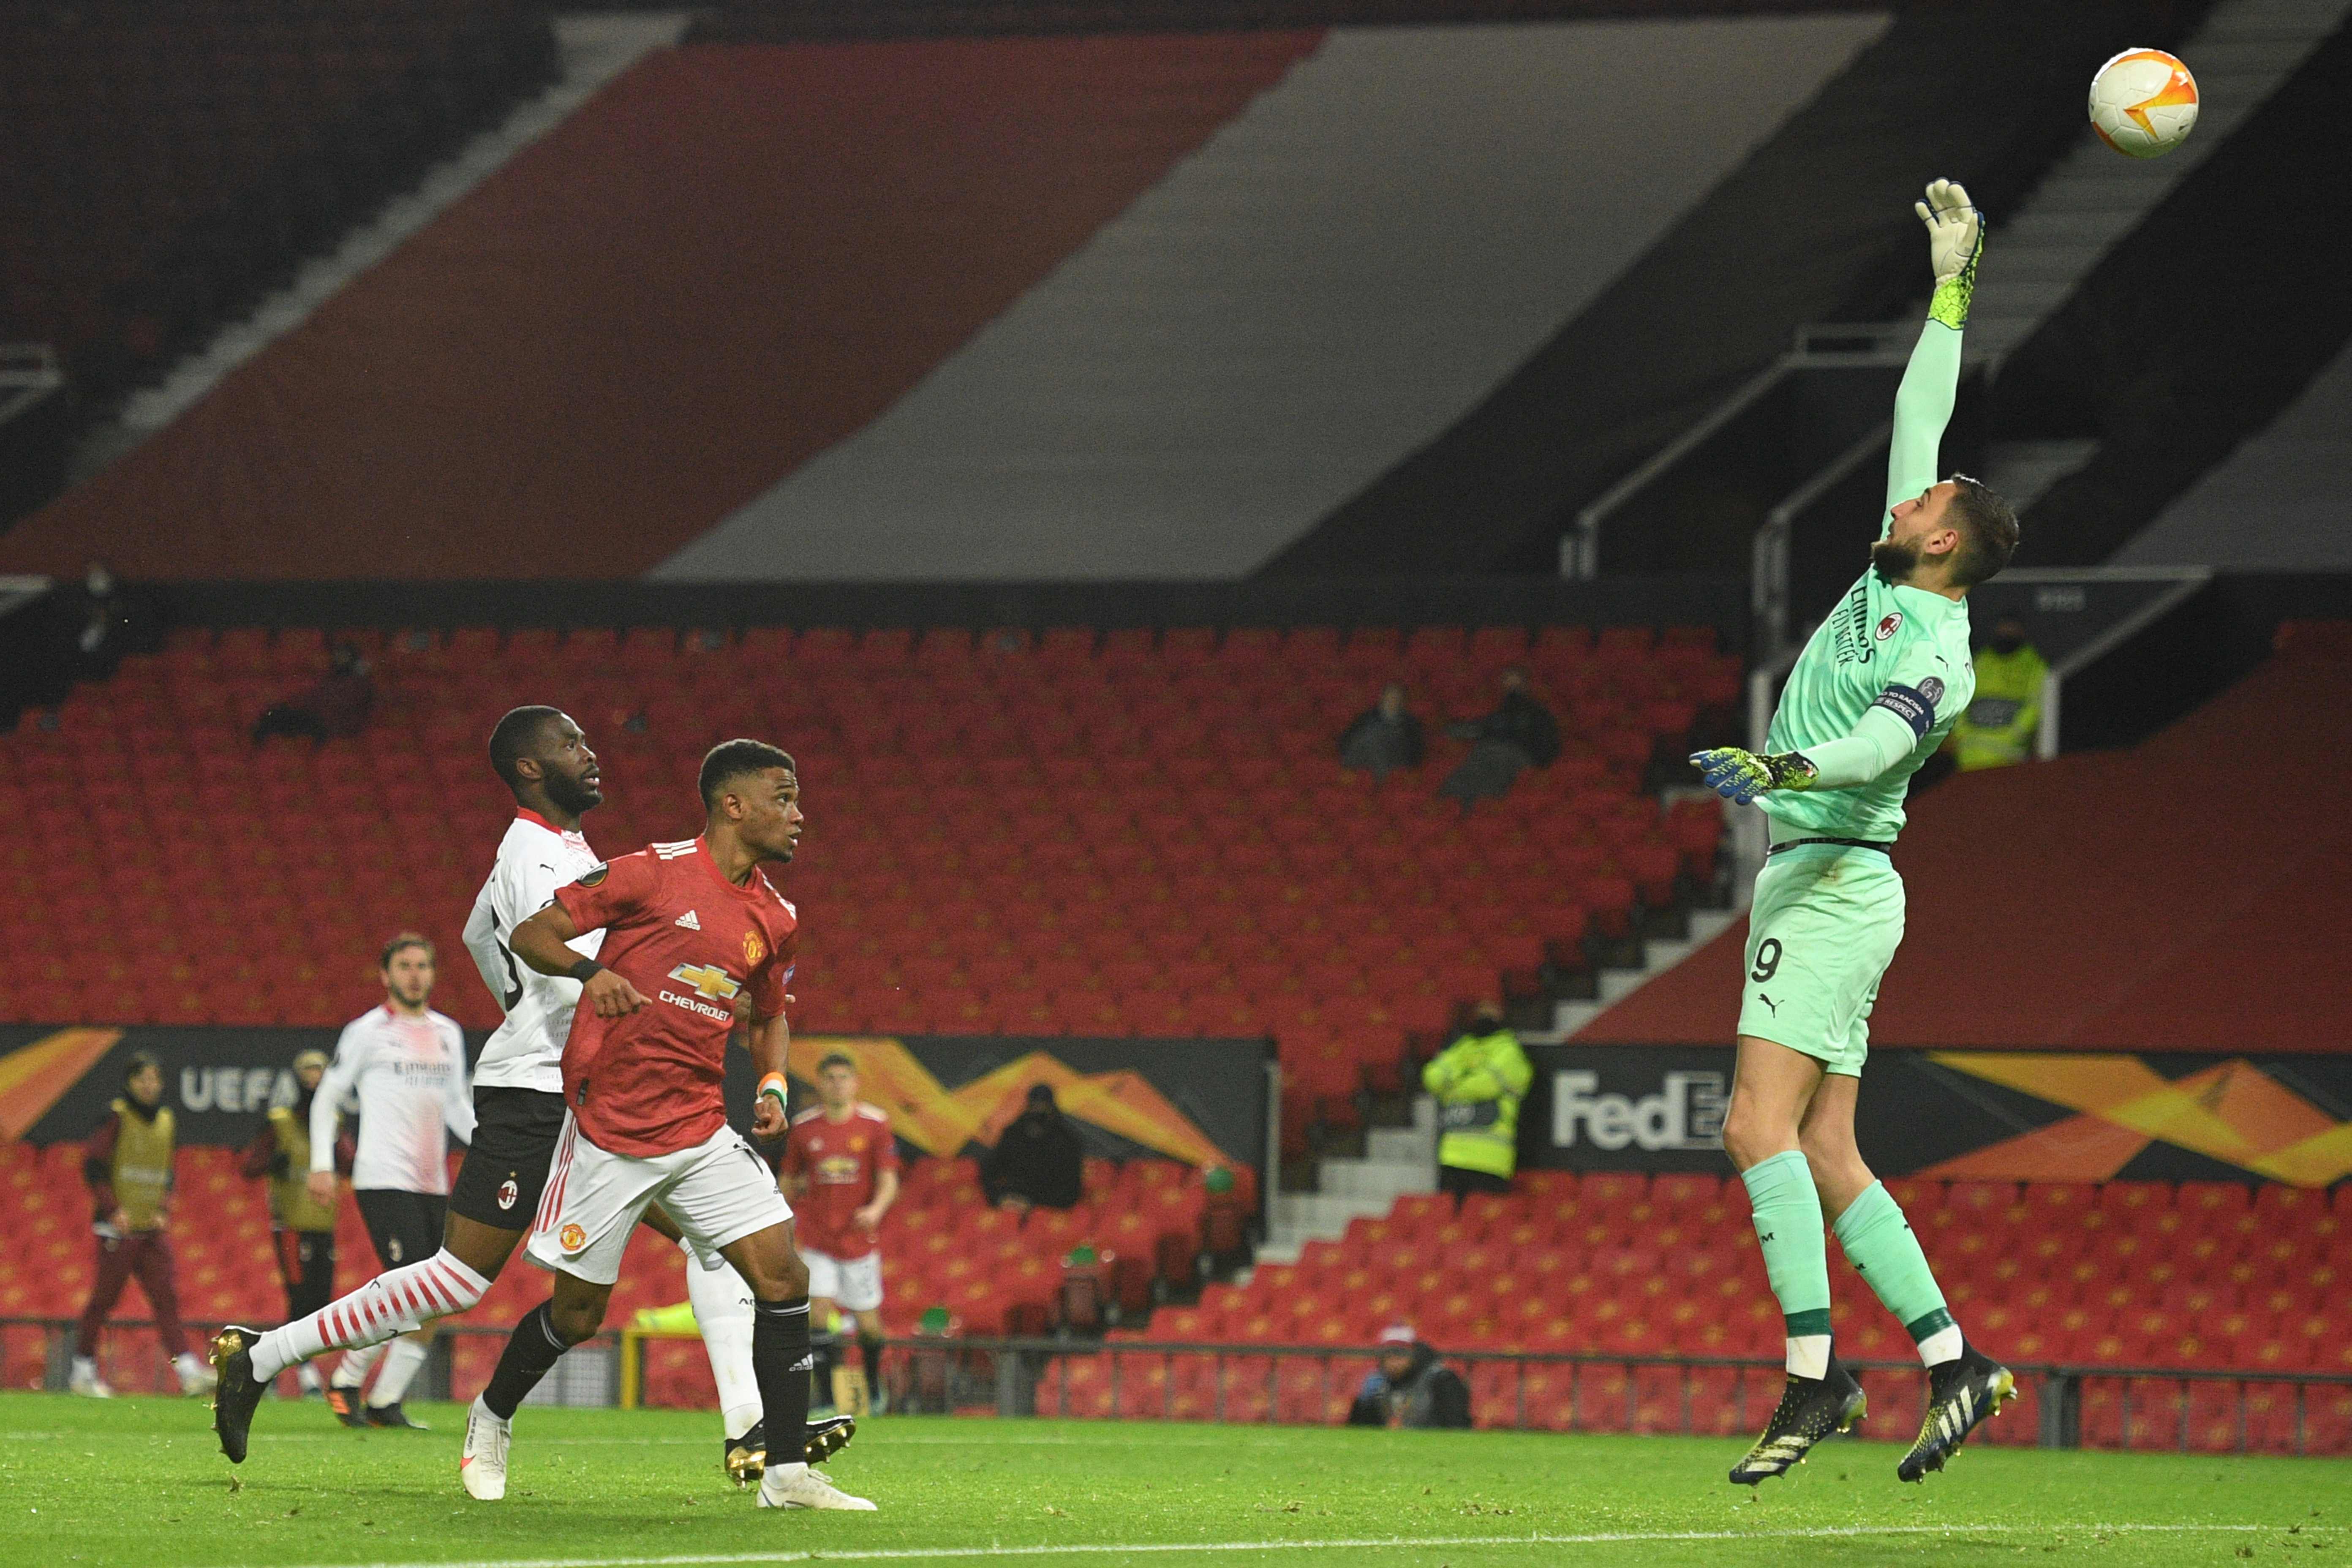 Amad Diallo scores Manchester United’s only goal of the night